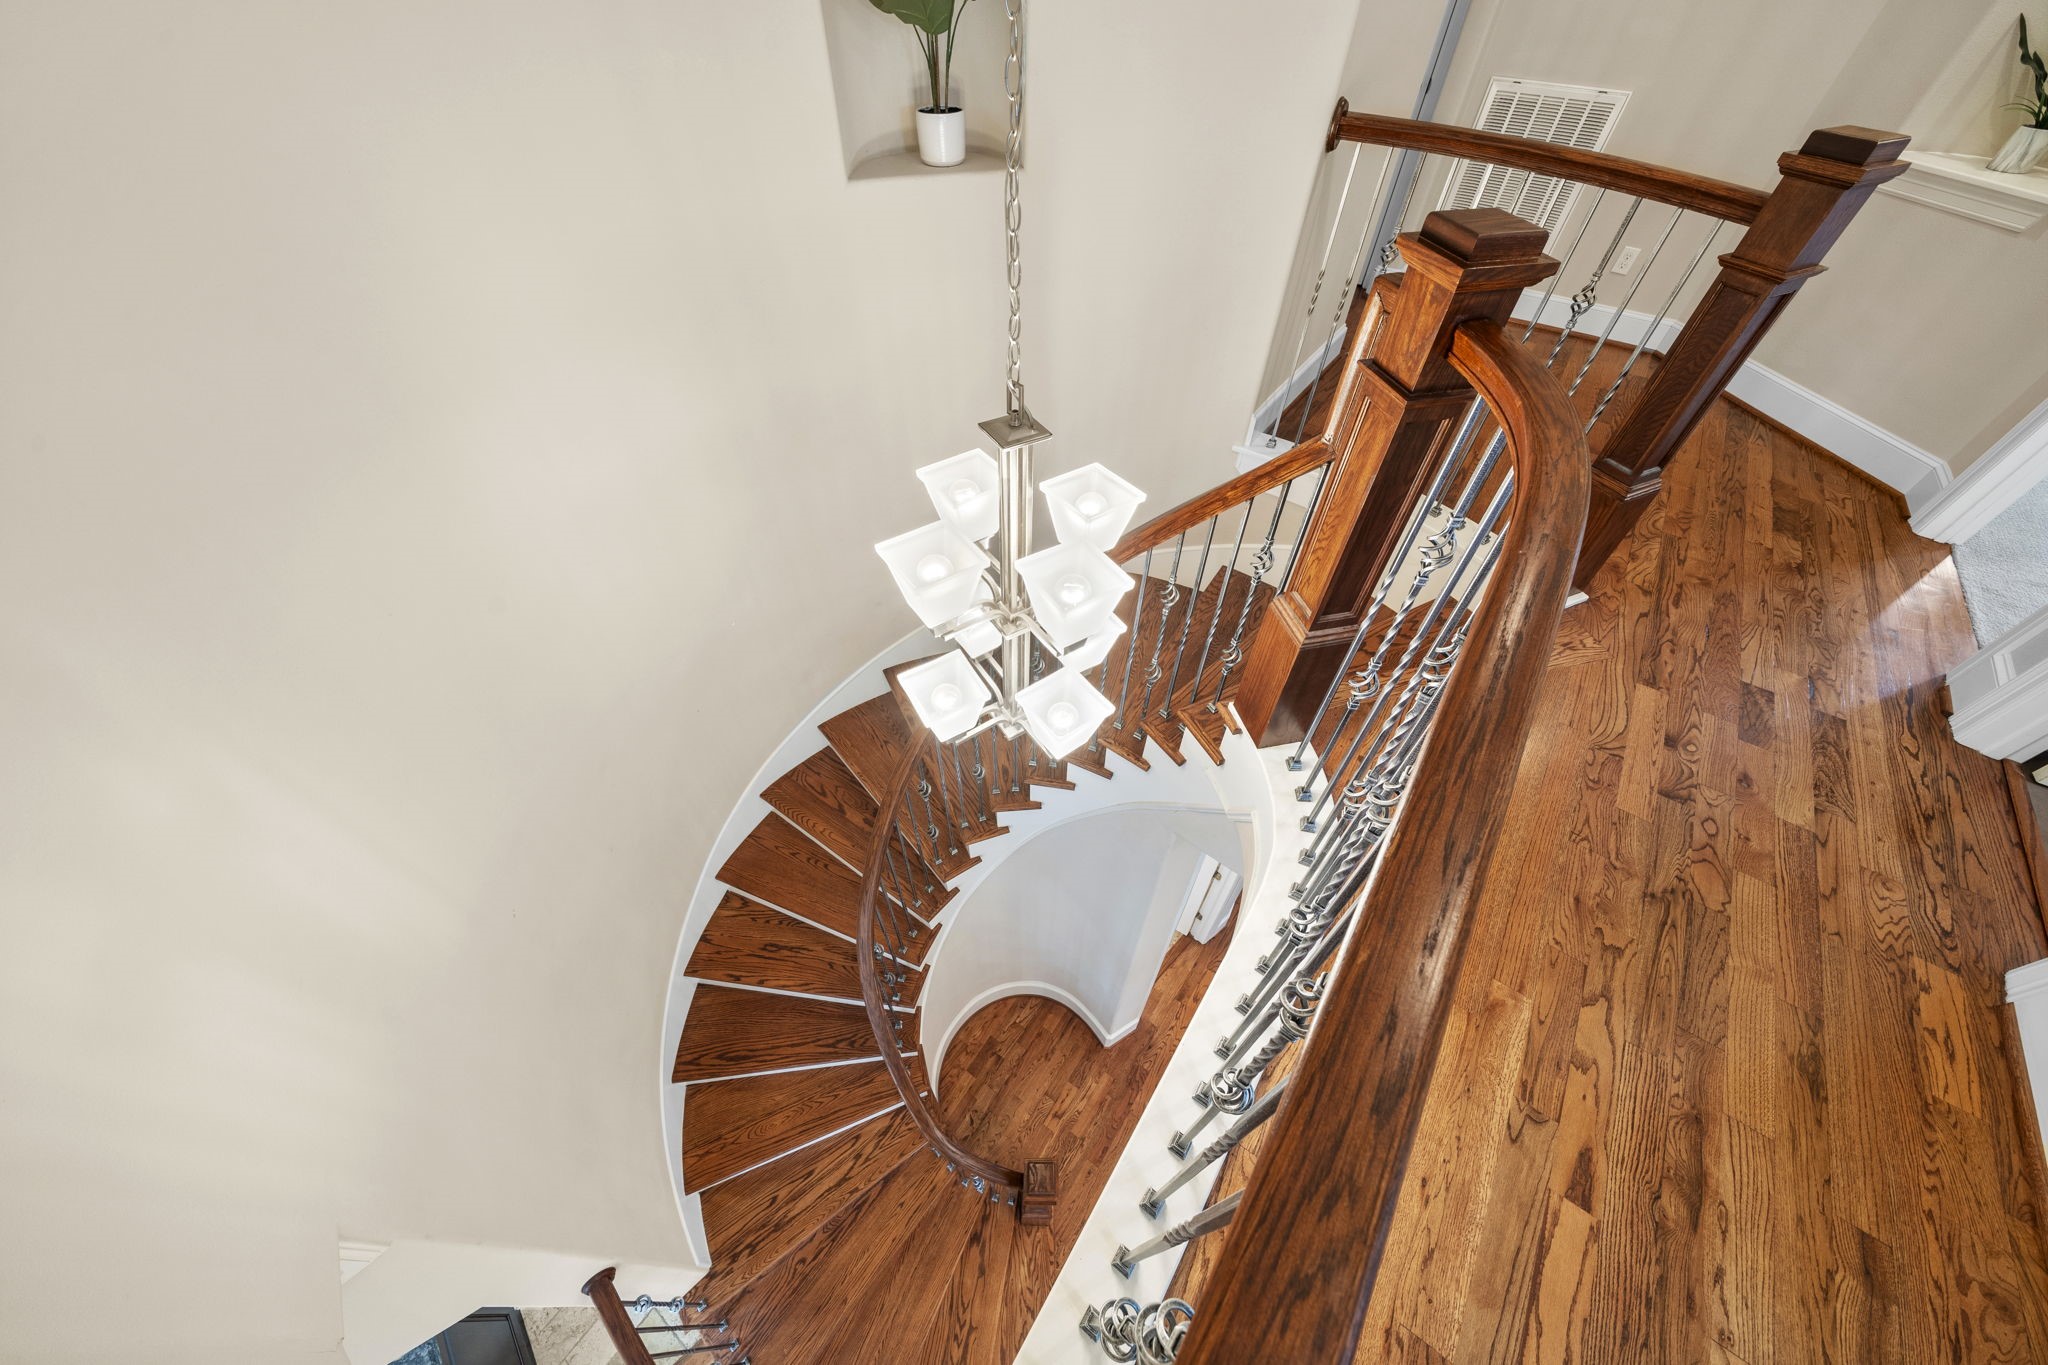 Easily reached from the formal dining room and upstairs hallway, the spiral staircase is adorned with wrought-iron spindles and wooden handrails, seamlessly blending with lustrous hardwood floors that continue throughout the second floor.